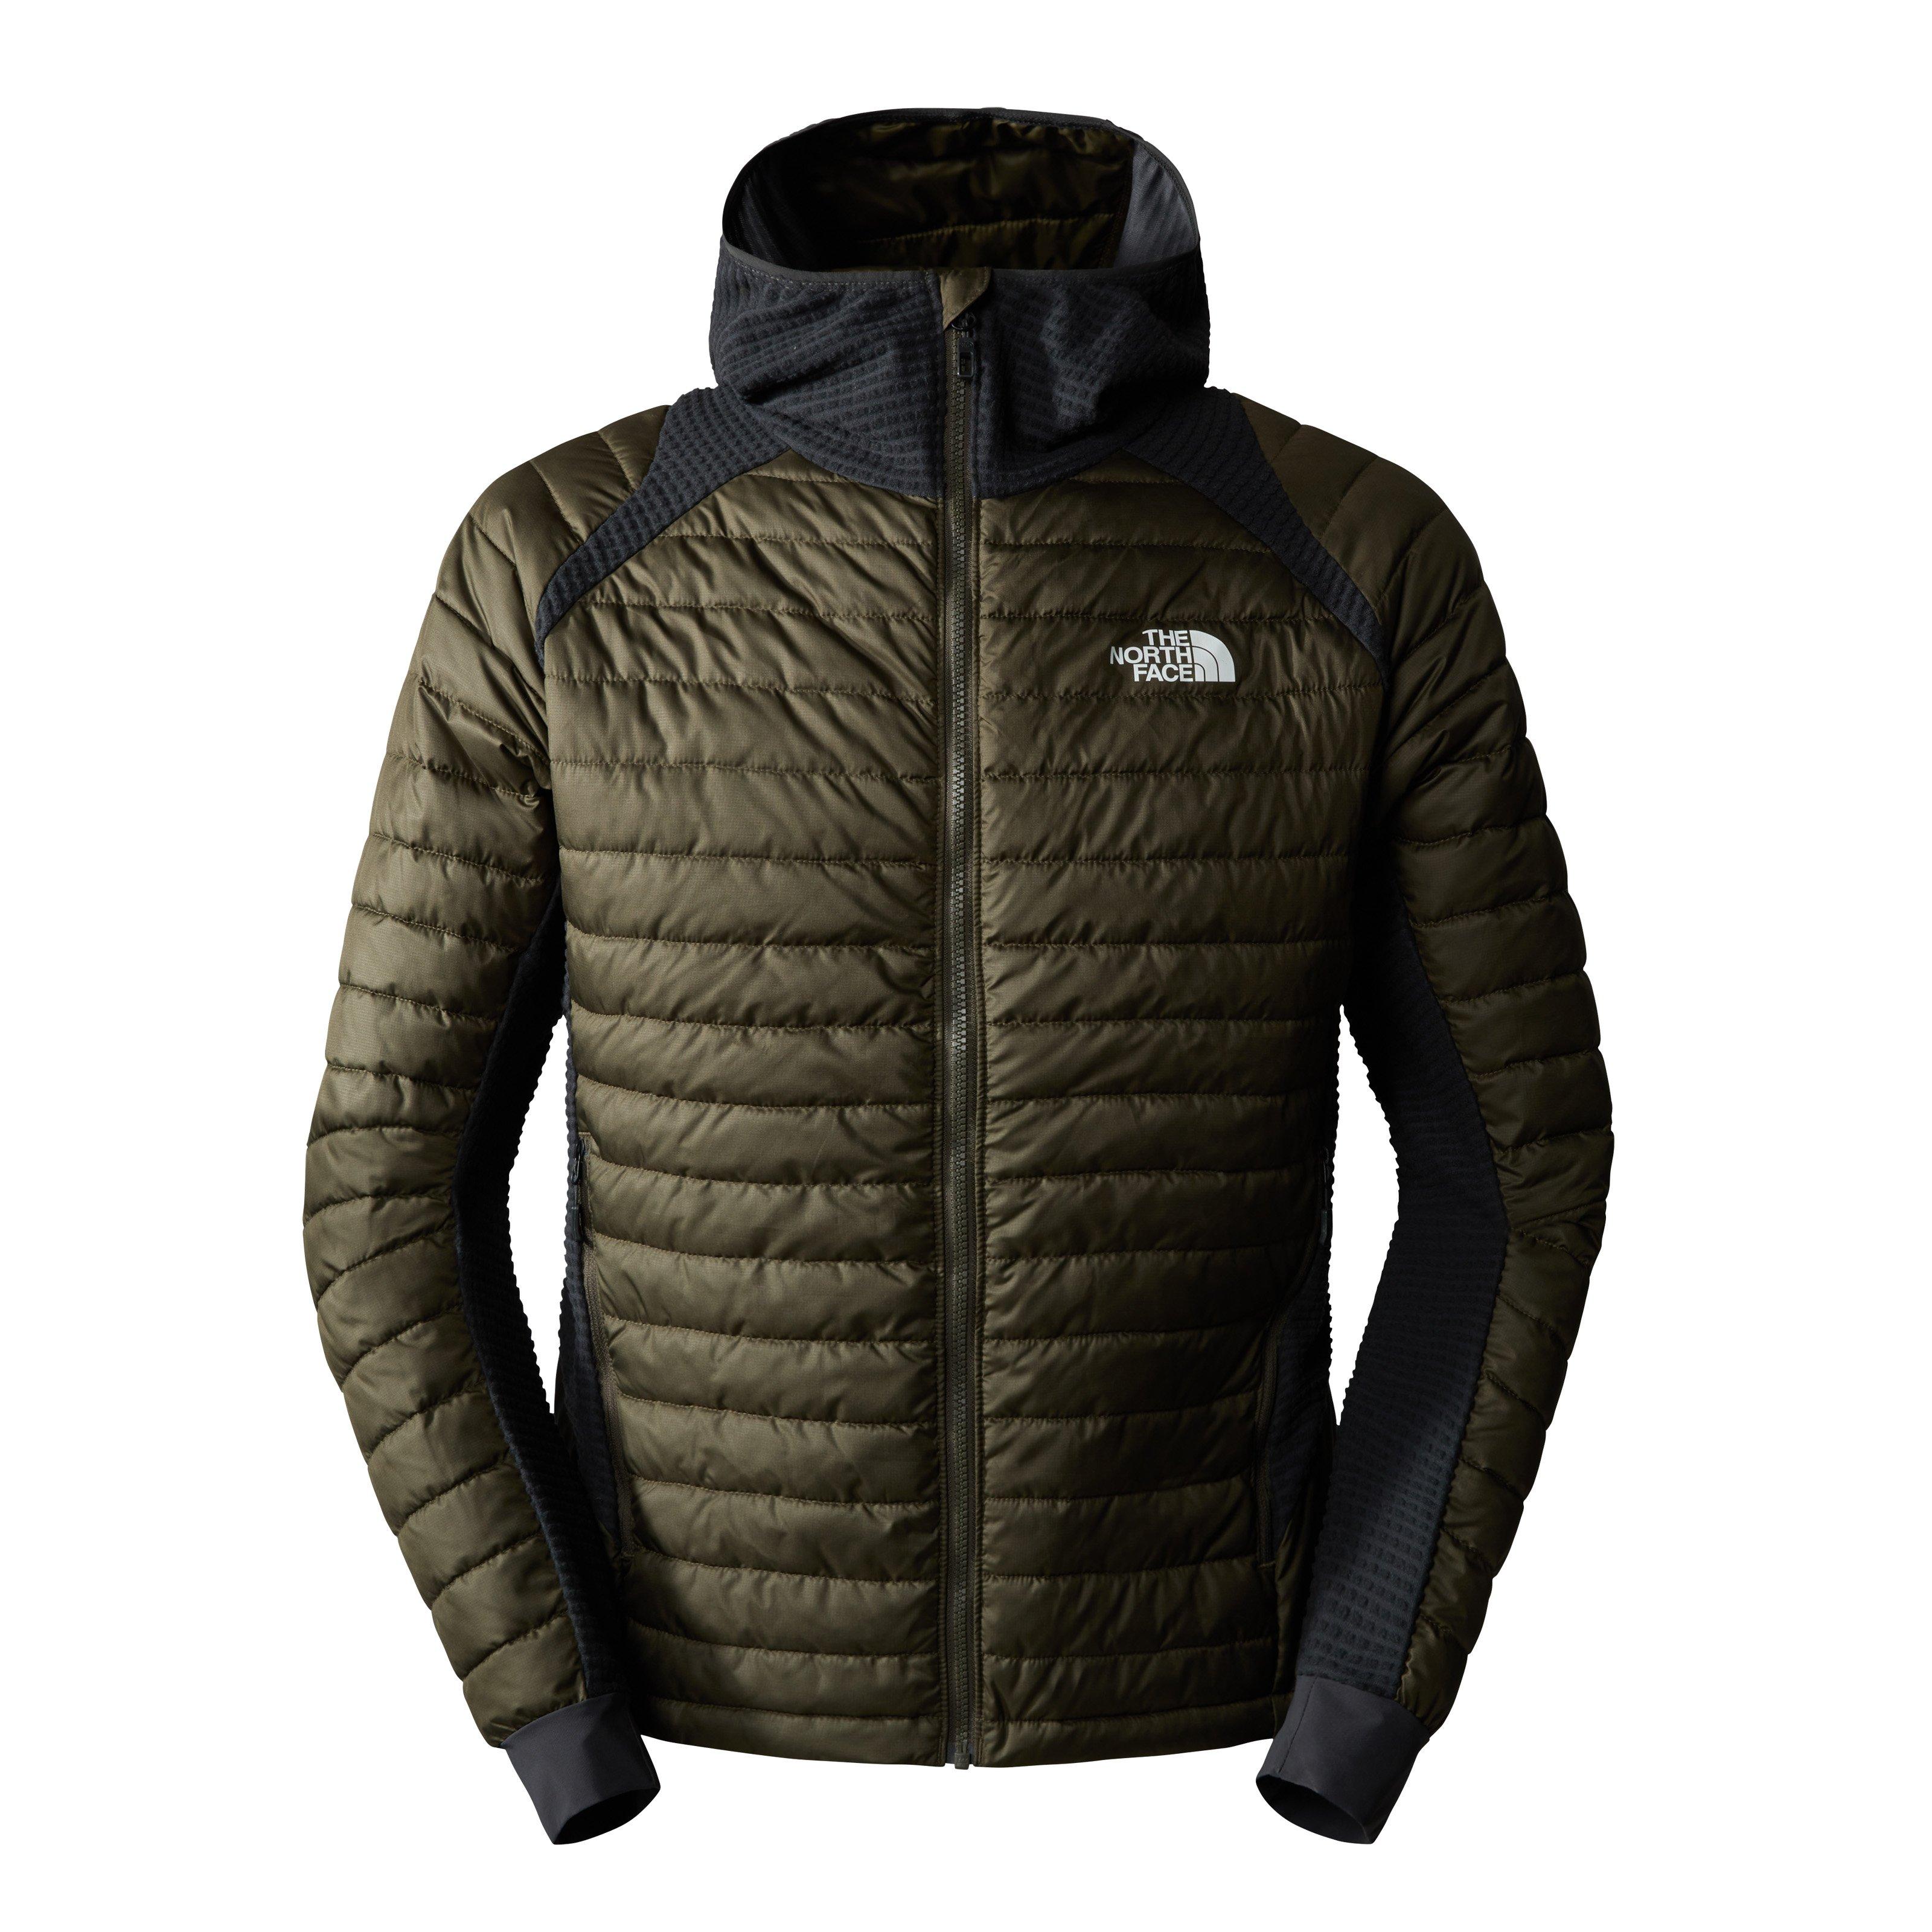 The North Face Men's Hybrid Insulated Jacket - Green | Tiso